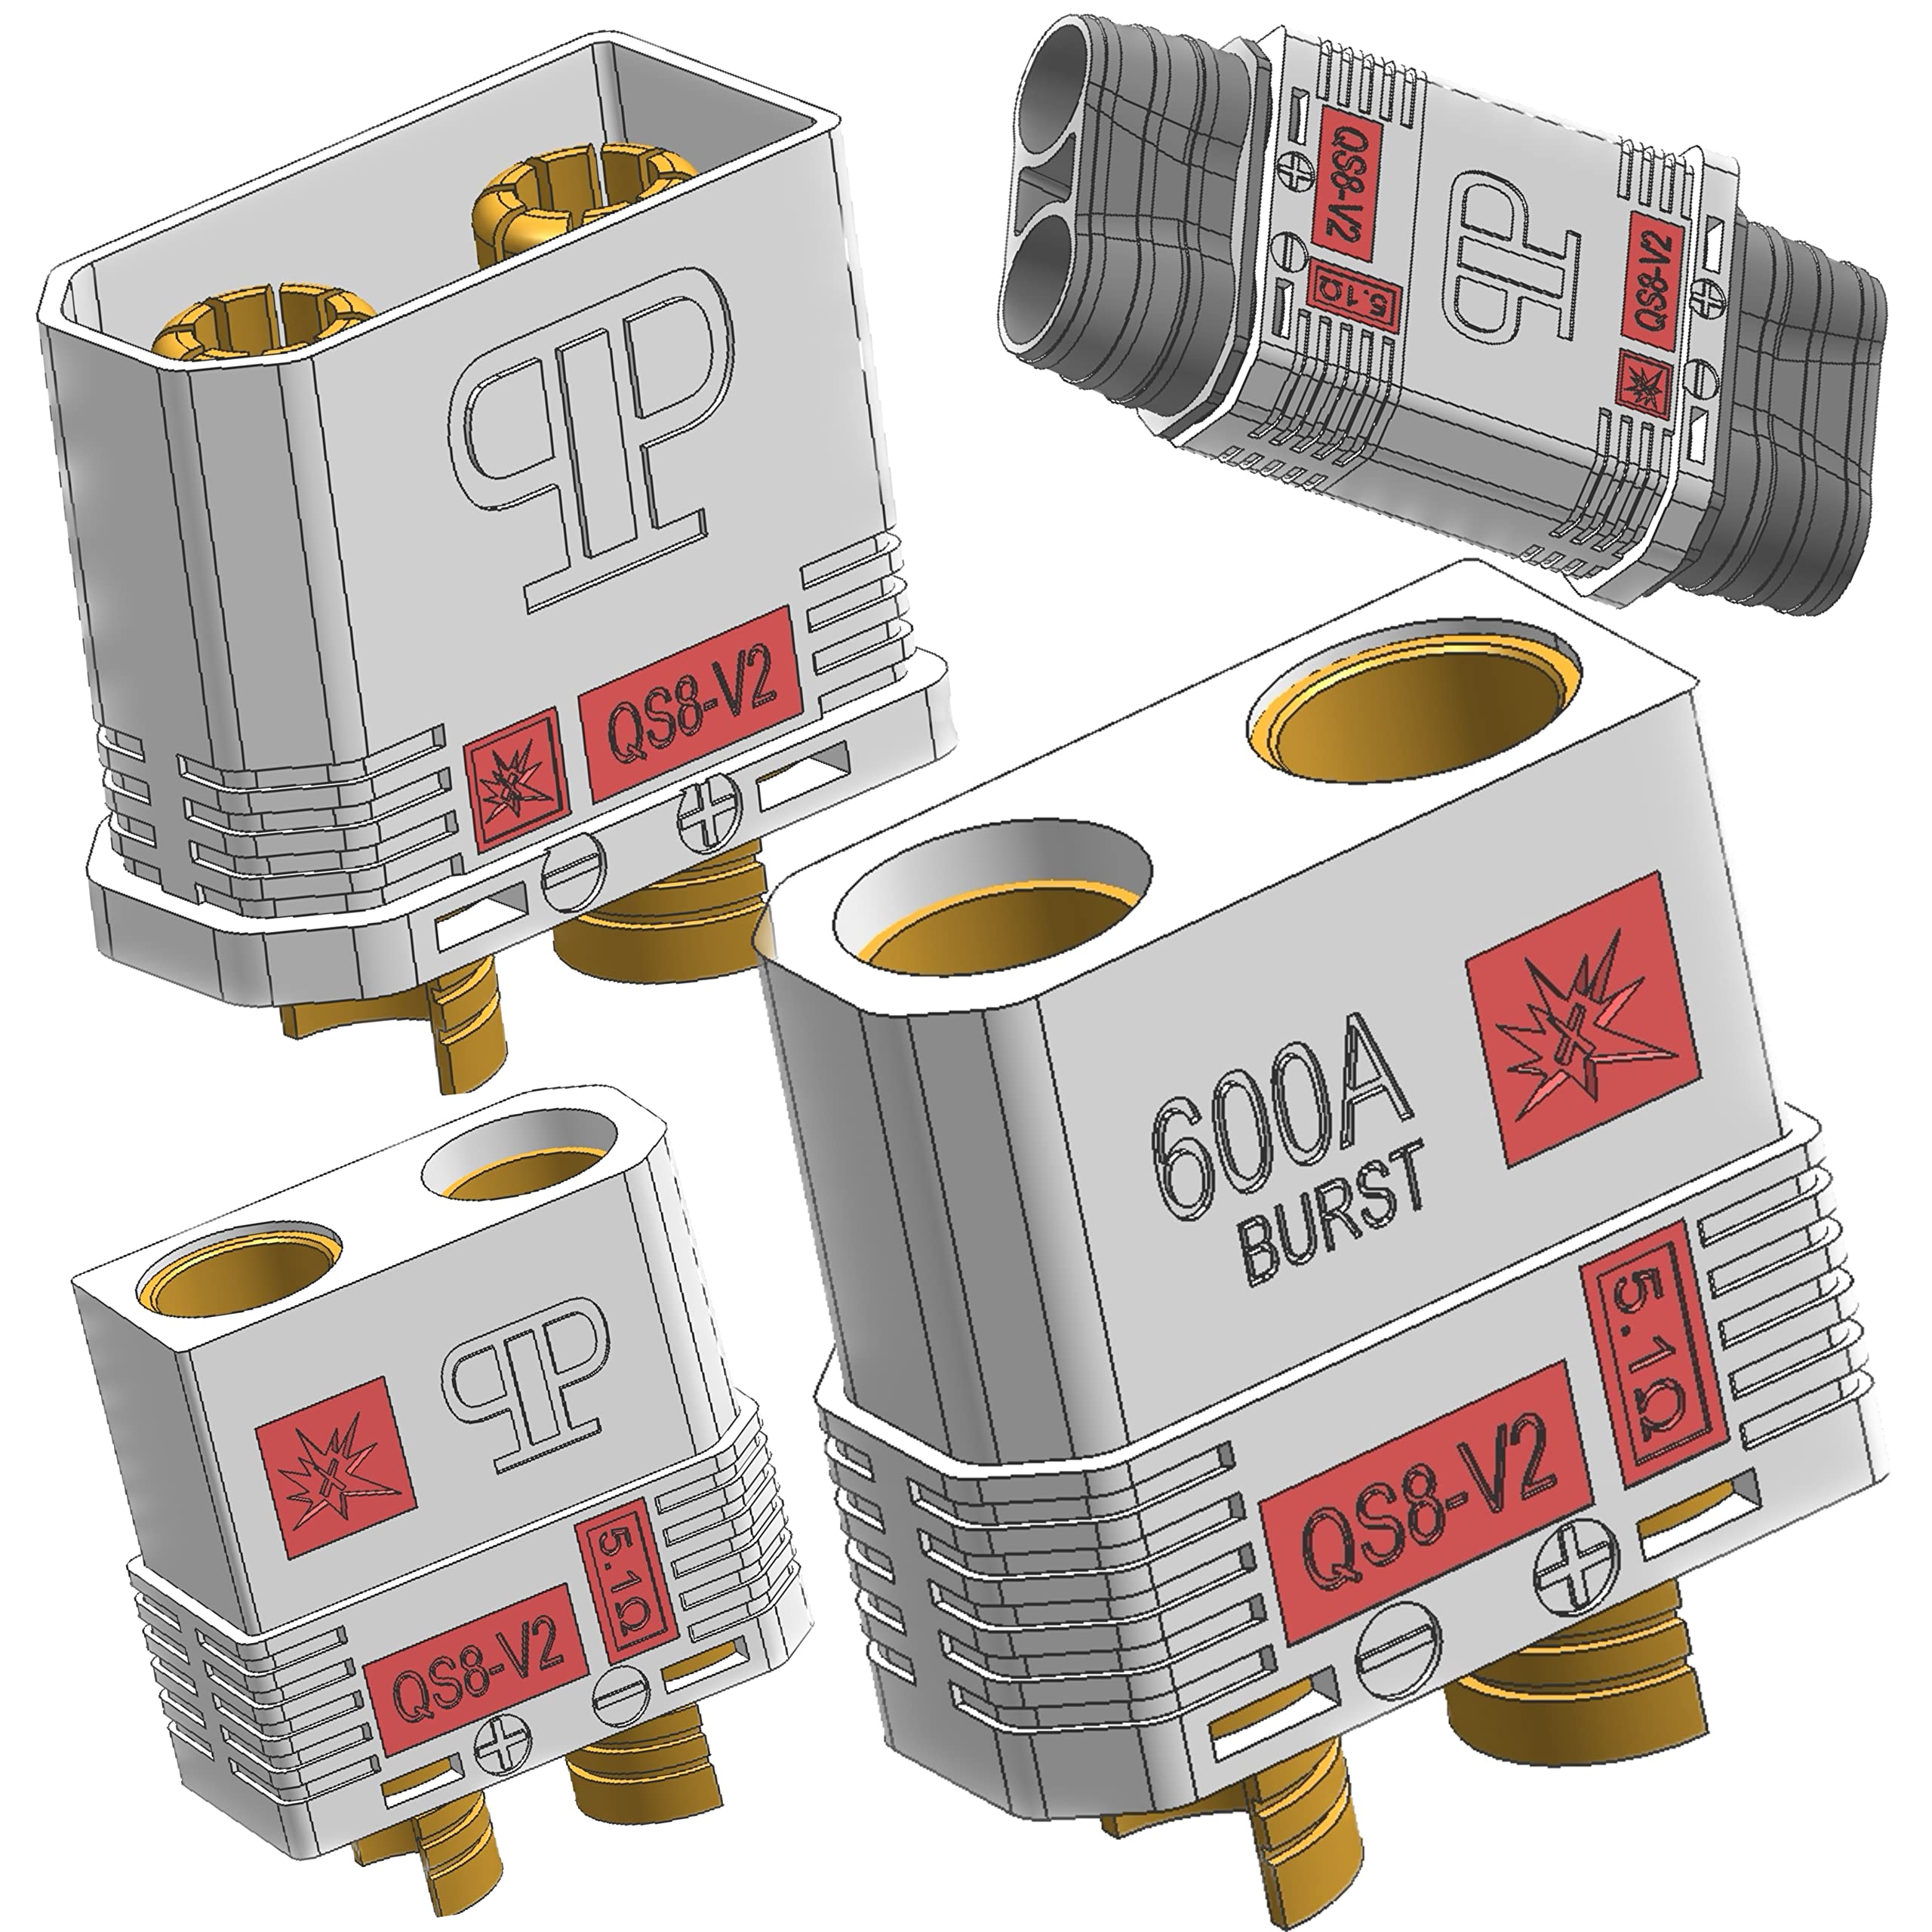 Perfect Pass QS8-V2 Anti-Spark Connector Set (5 Pack) Male & Female + Wire Covers (4pc x 5) / New and Improved Version of QS8-S Connector / 600A Burst/Gold Plated 8MM Bullets QS8-V2!